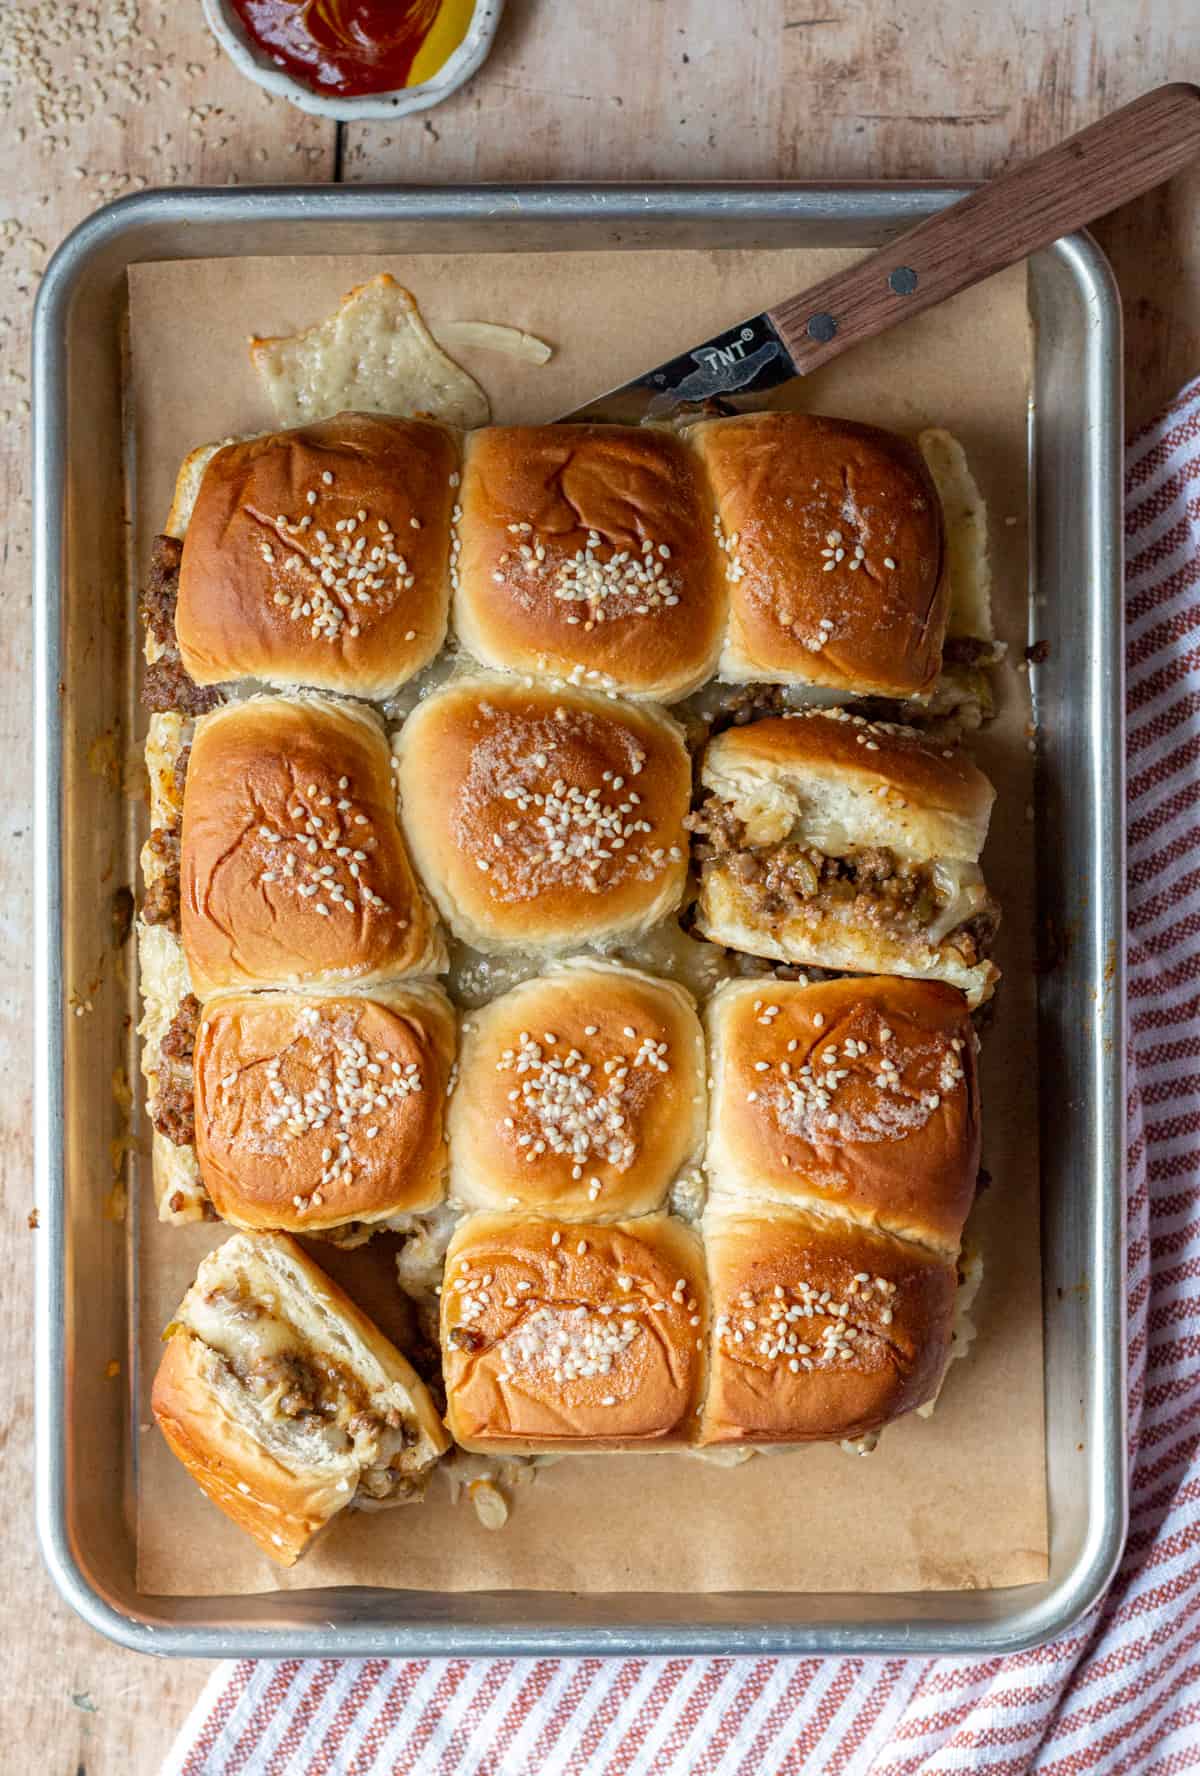 Cheeseburger Sliders with Hawaiian Rolls on a sheet pan lined with parchment paper, with a knife and a bowl of ketchup and mustard.